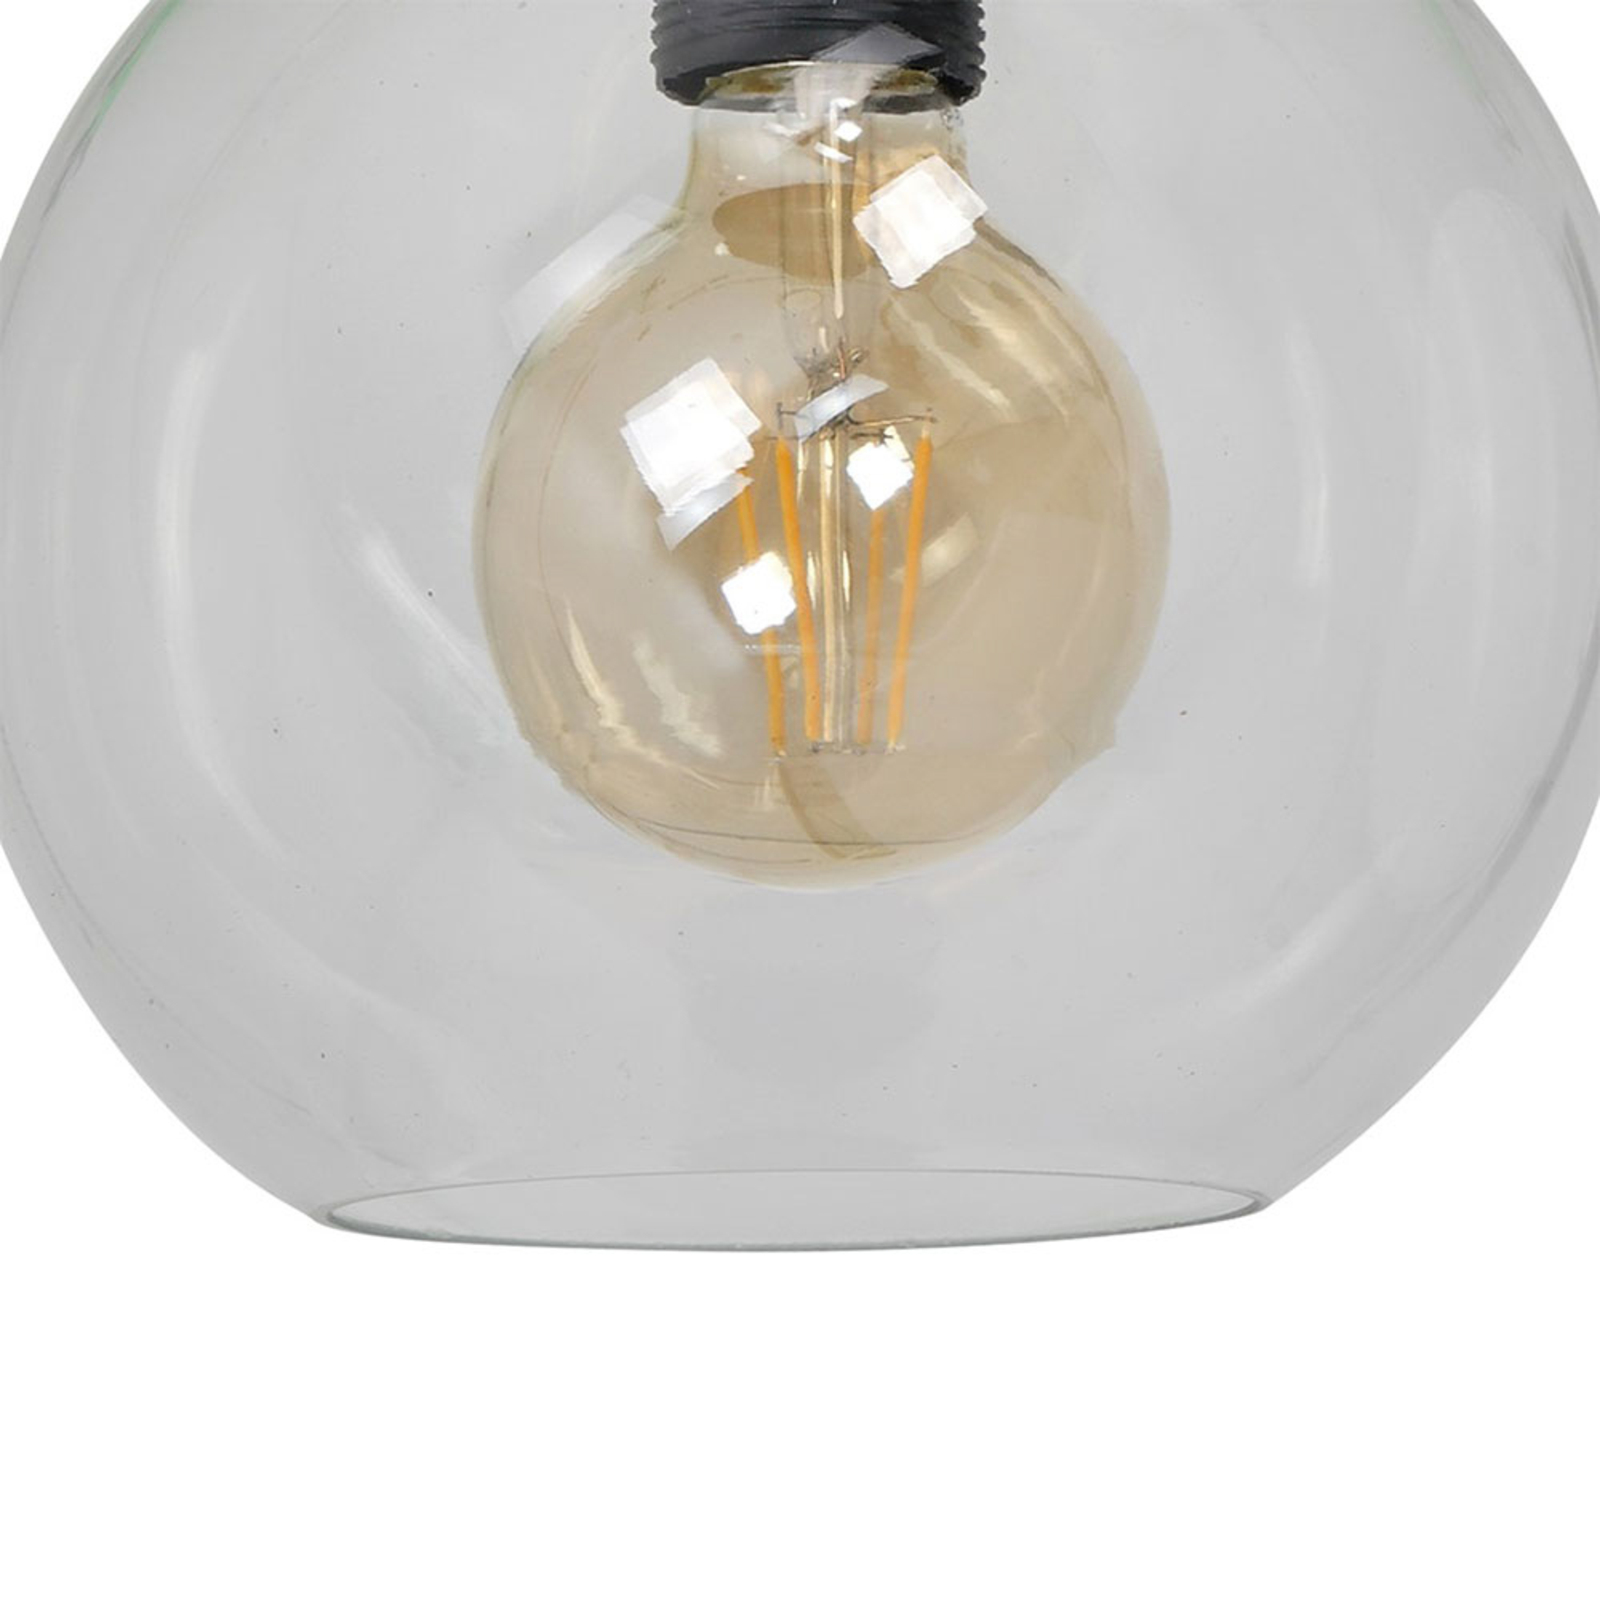 Sofia ceiling light, clear glass lampshade